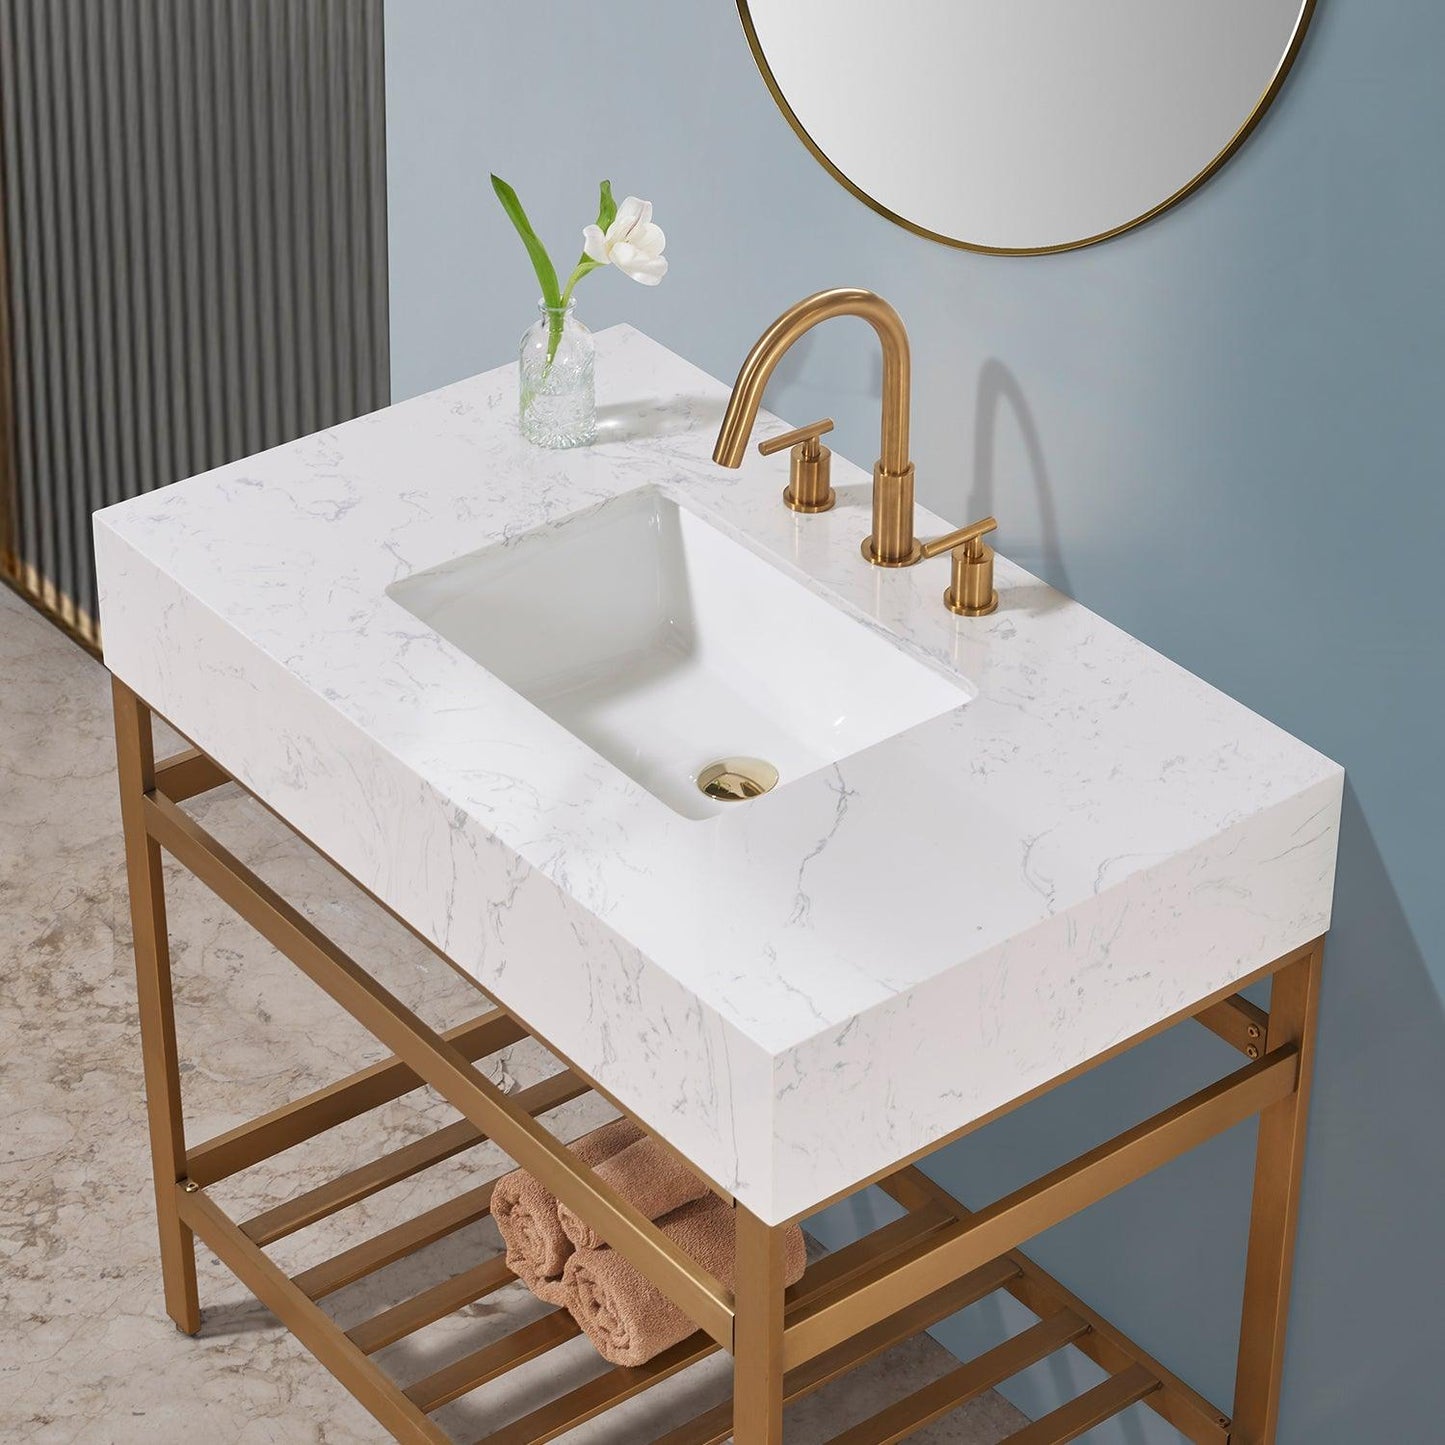 Altair Merano Single Stainless Steel Vanity Console with Aosta White Stone Countertop and Optional Mirror - Sea & Stone Bath